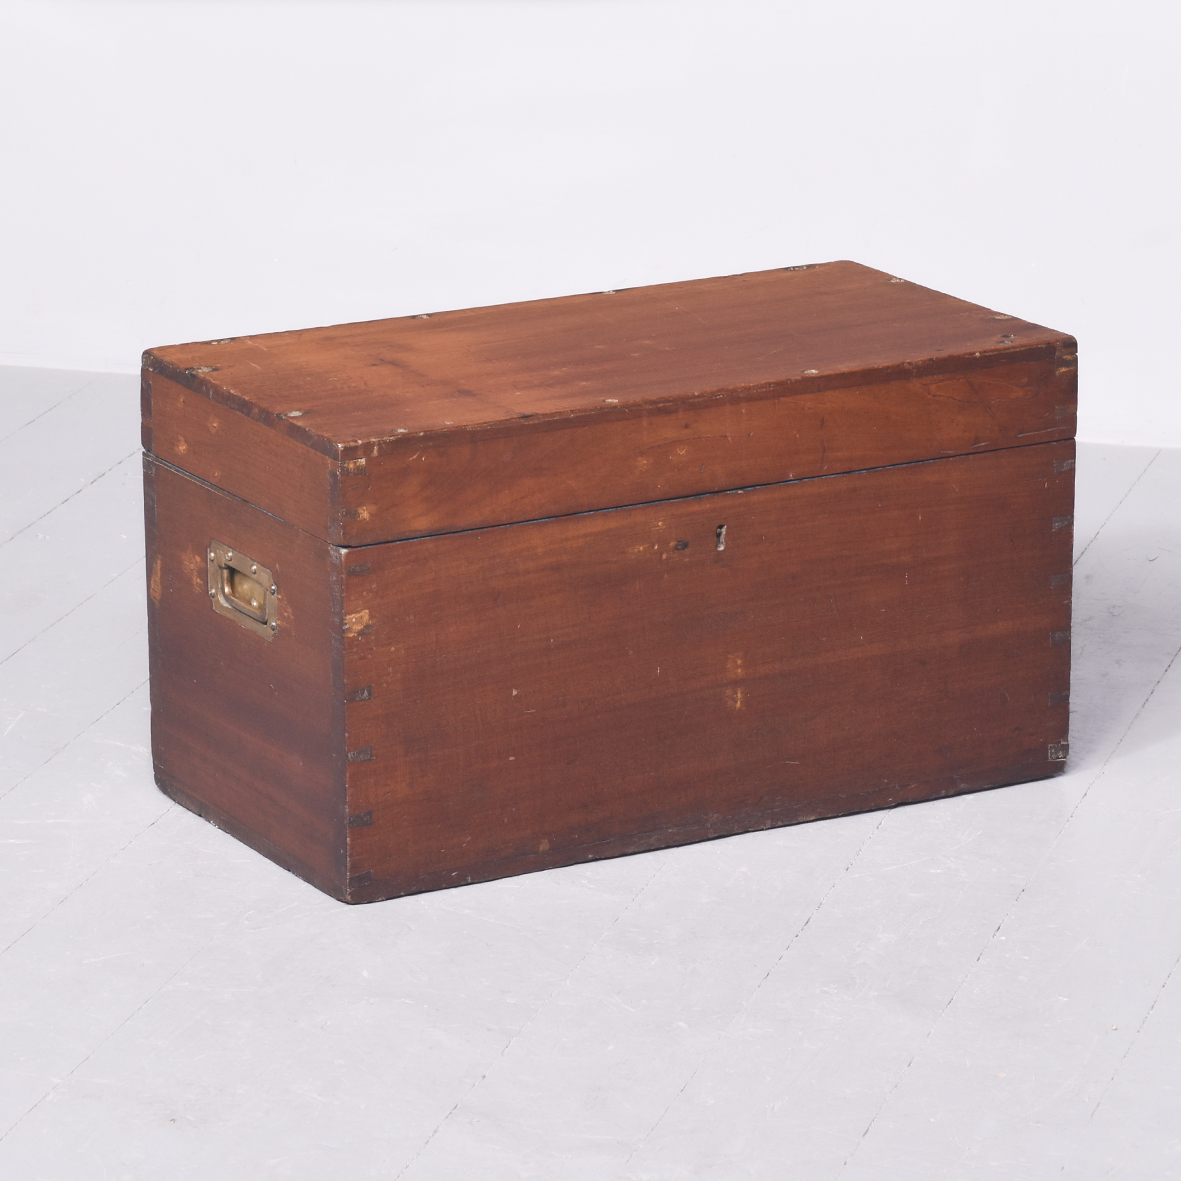 Neat-Sized, Victorian Solid Teak Military or Campaign Trunk campaign chest Antique Boxes